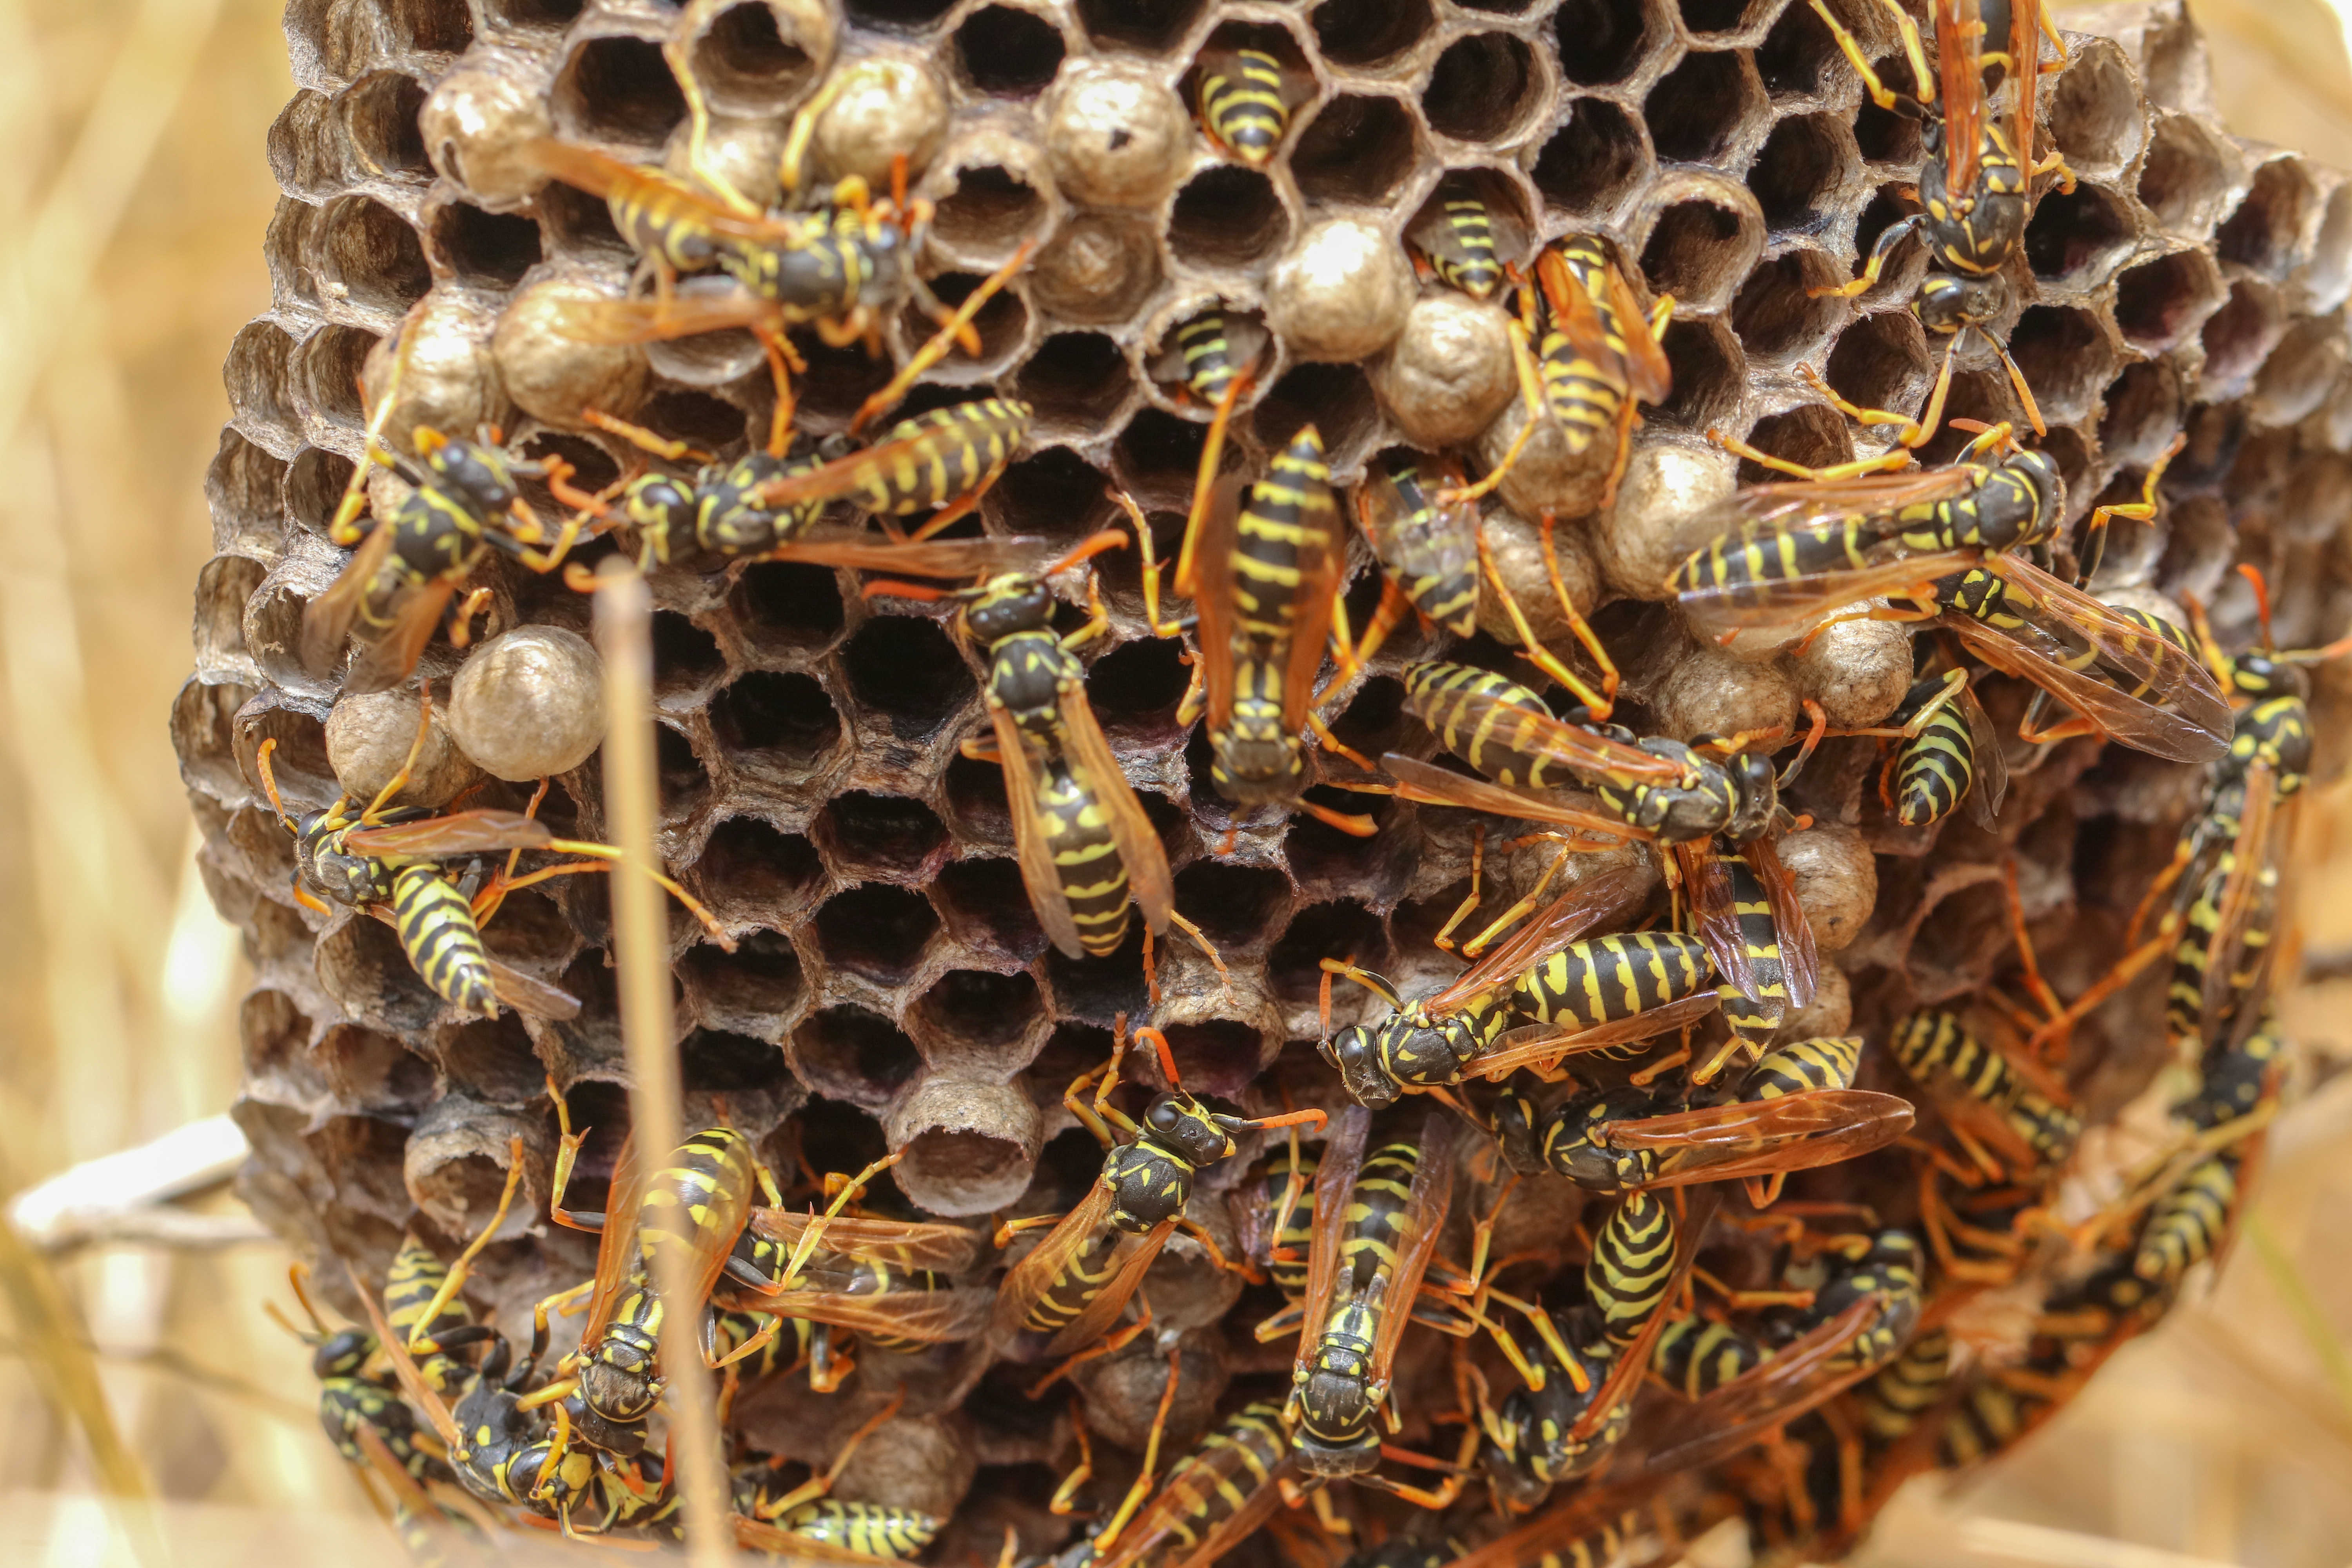 A hornets nests - learn how GGA Pest Management Killeen can help with our hornet pest control services.